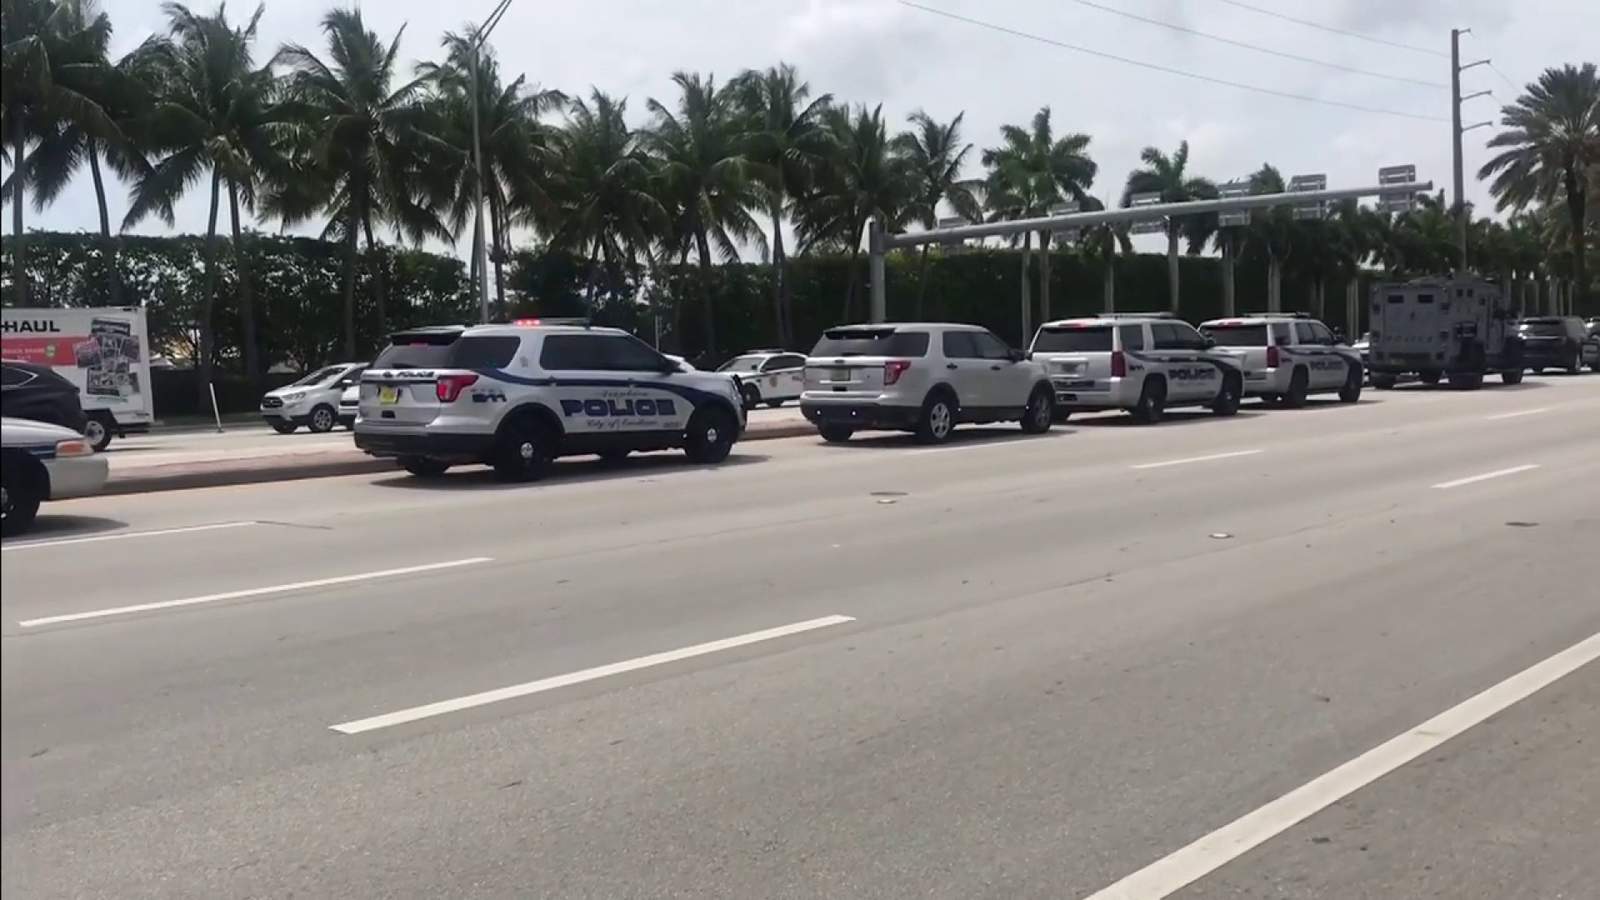 Popular South Florida malls close early due to threat of protests, looting